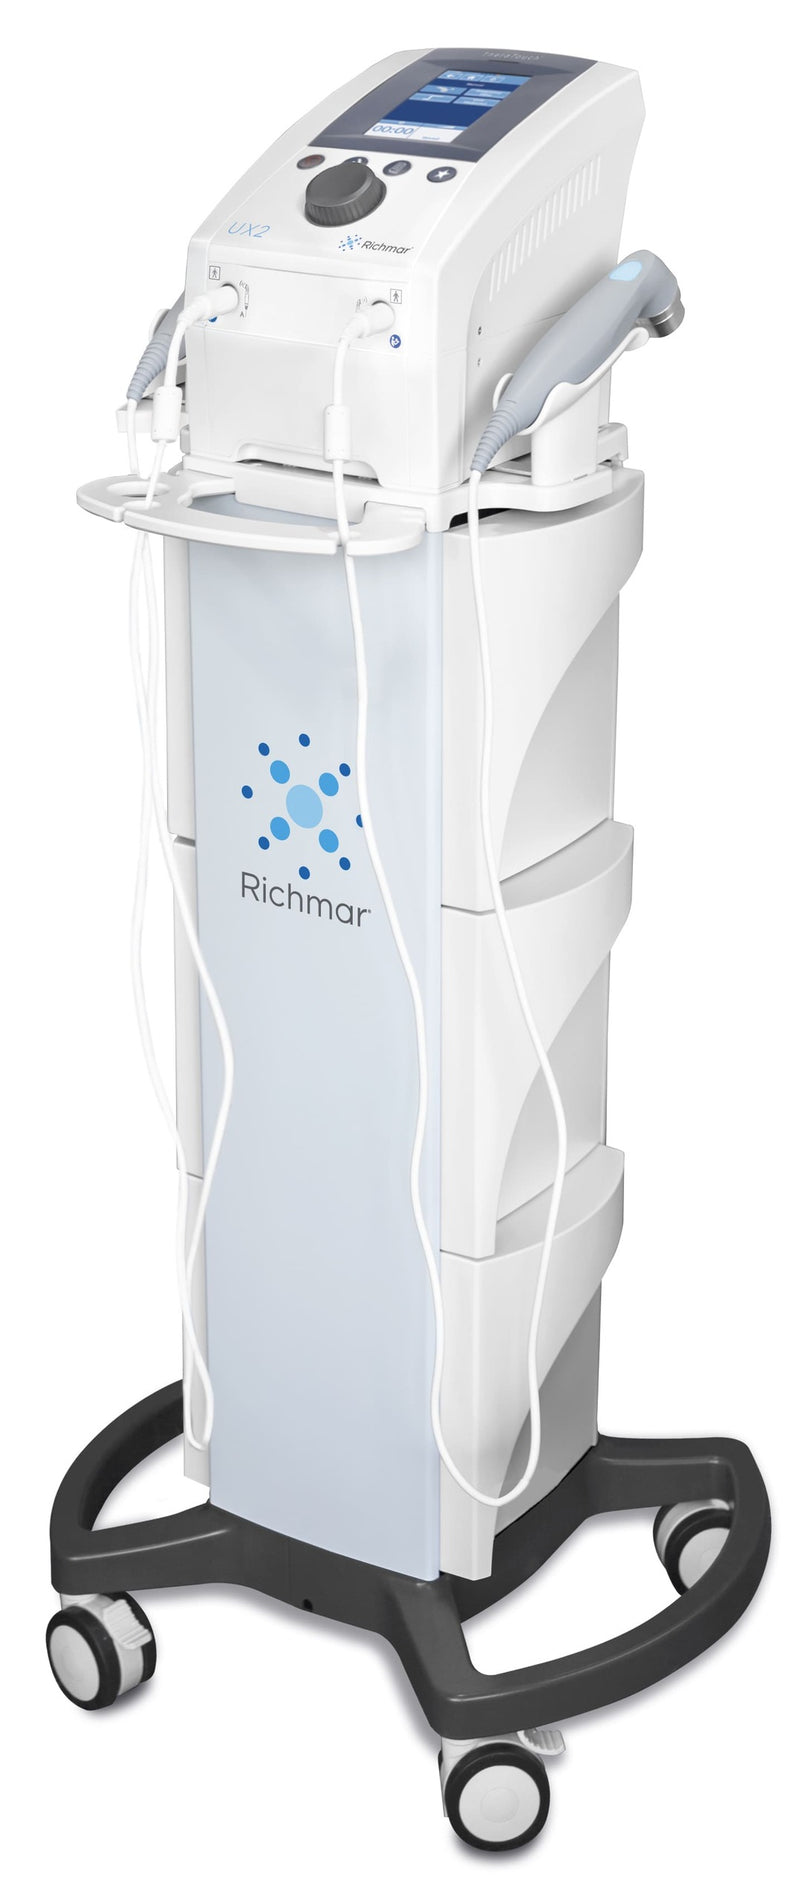 Richmar TheraTouch UX2 Clinical Ultrasound Therapy Device [2 Free 5L Container of Ultrasound Gel with 8oz Bottle Dispenser]